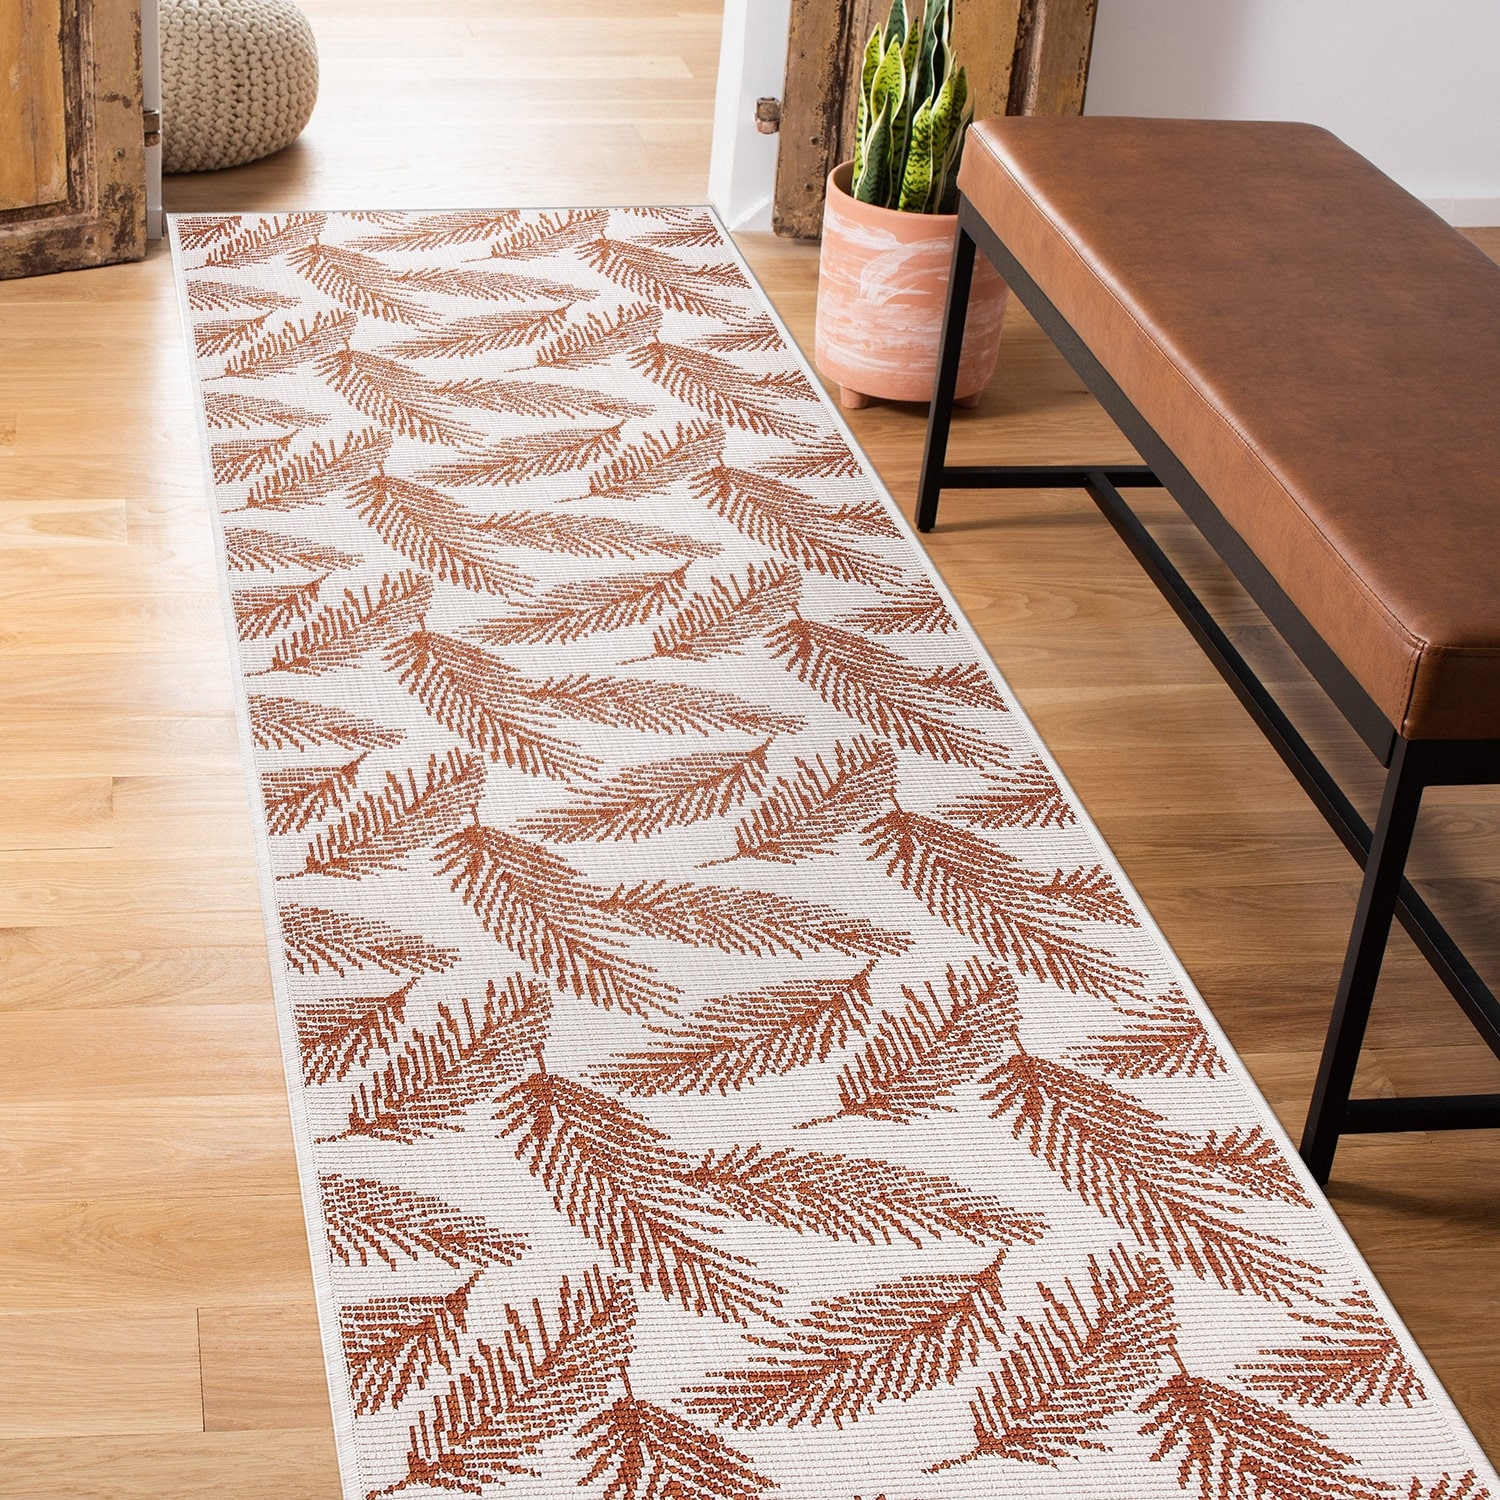 https://ak1.ostkcdn.com/images/products/is/images/direct/9a0ef9dd8c902df857f0708c9a42e4f8b17ce644/World-Rug-Gallery-Nature-Inspired-Floral-Leaves-Indoor-Outdoor-Area-Rug.jpg